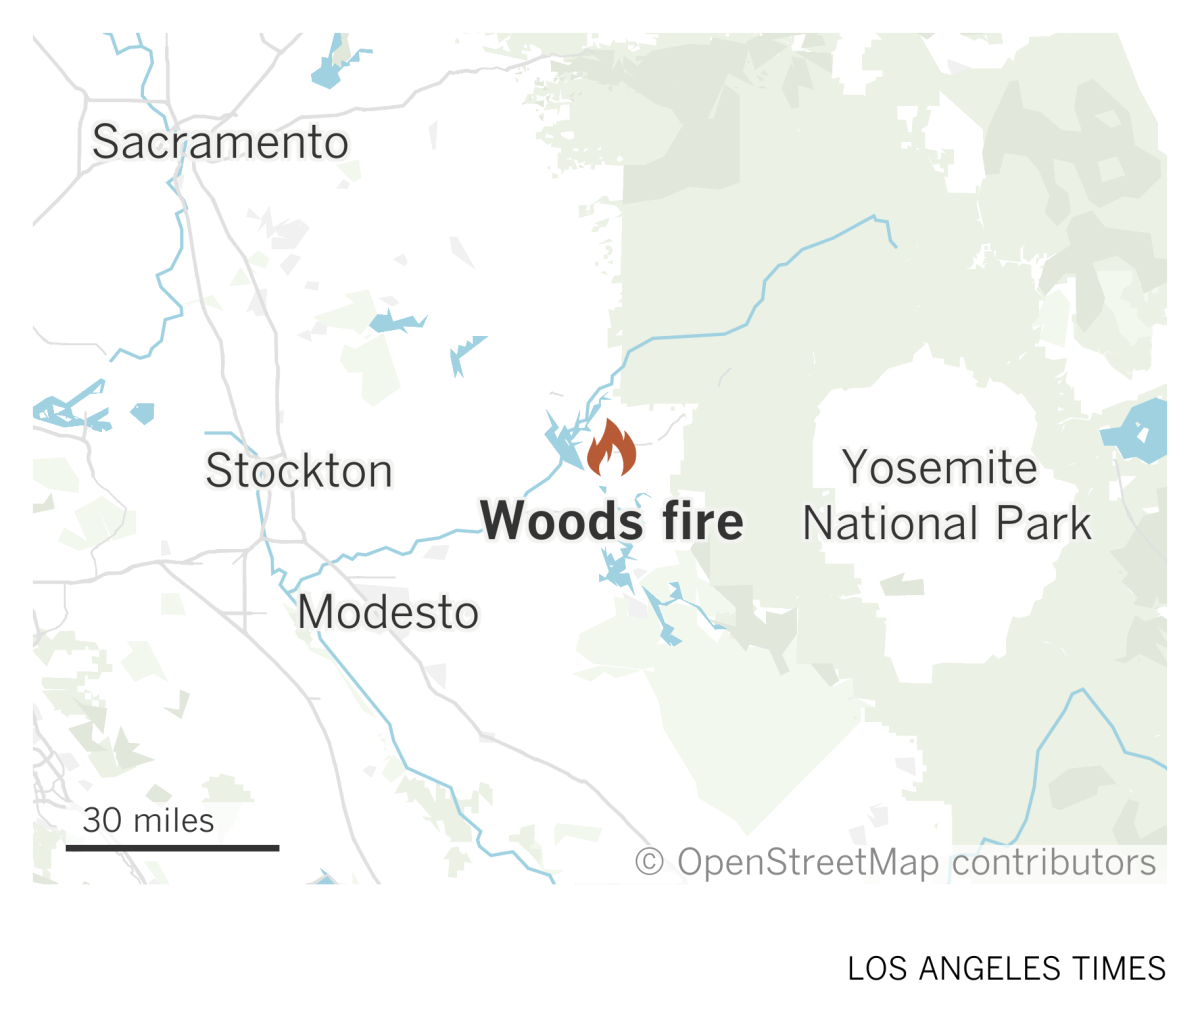 A map of part of Northern California shows the location of the Woods fire.